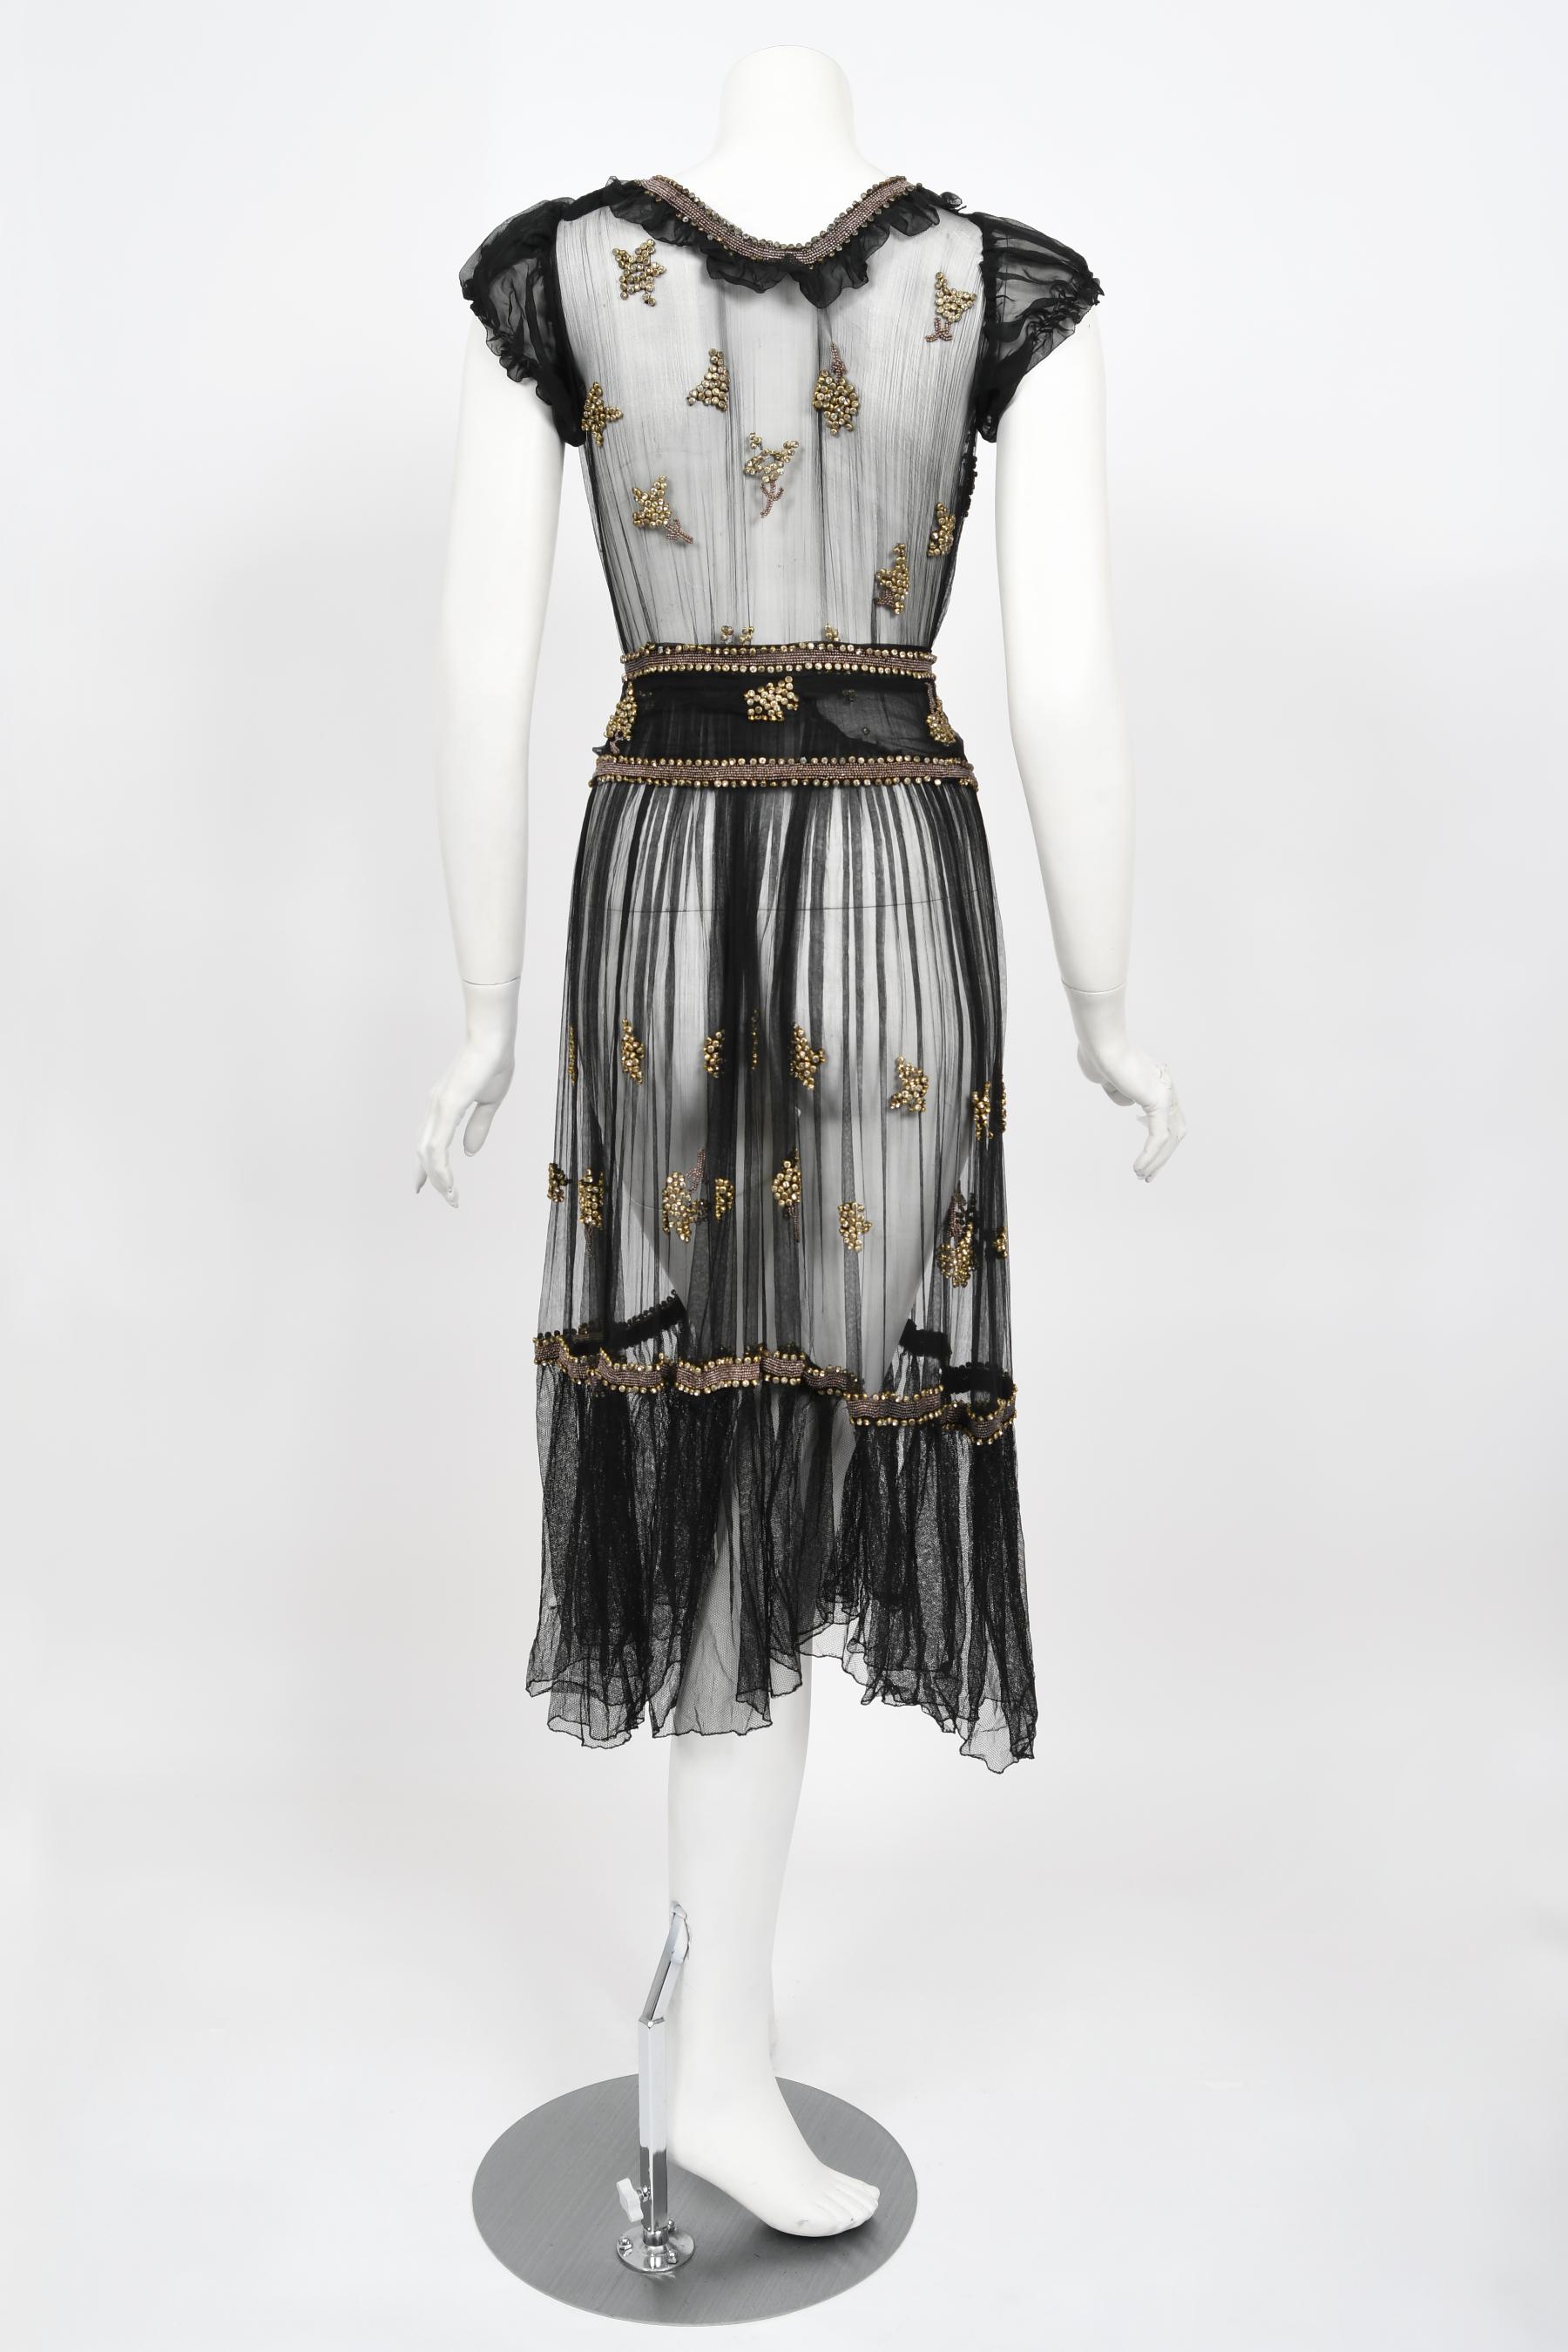 Vintage 1930's Bette Davis Owned Old Hollywood Sheer Beaded Silk Couture Dress For Sale 7